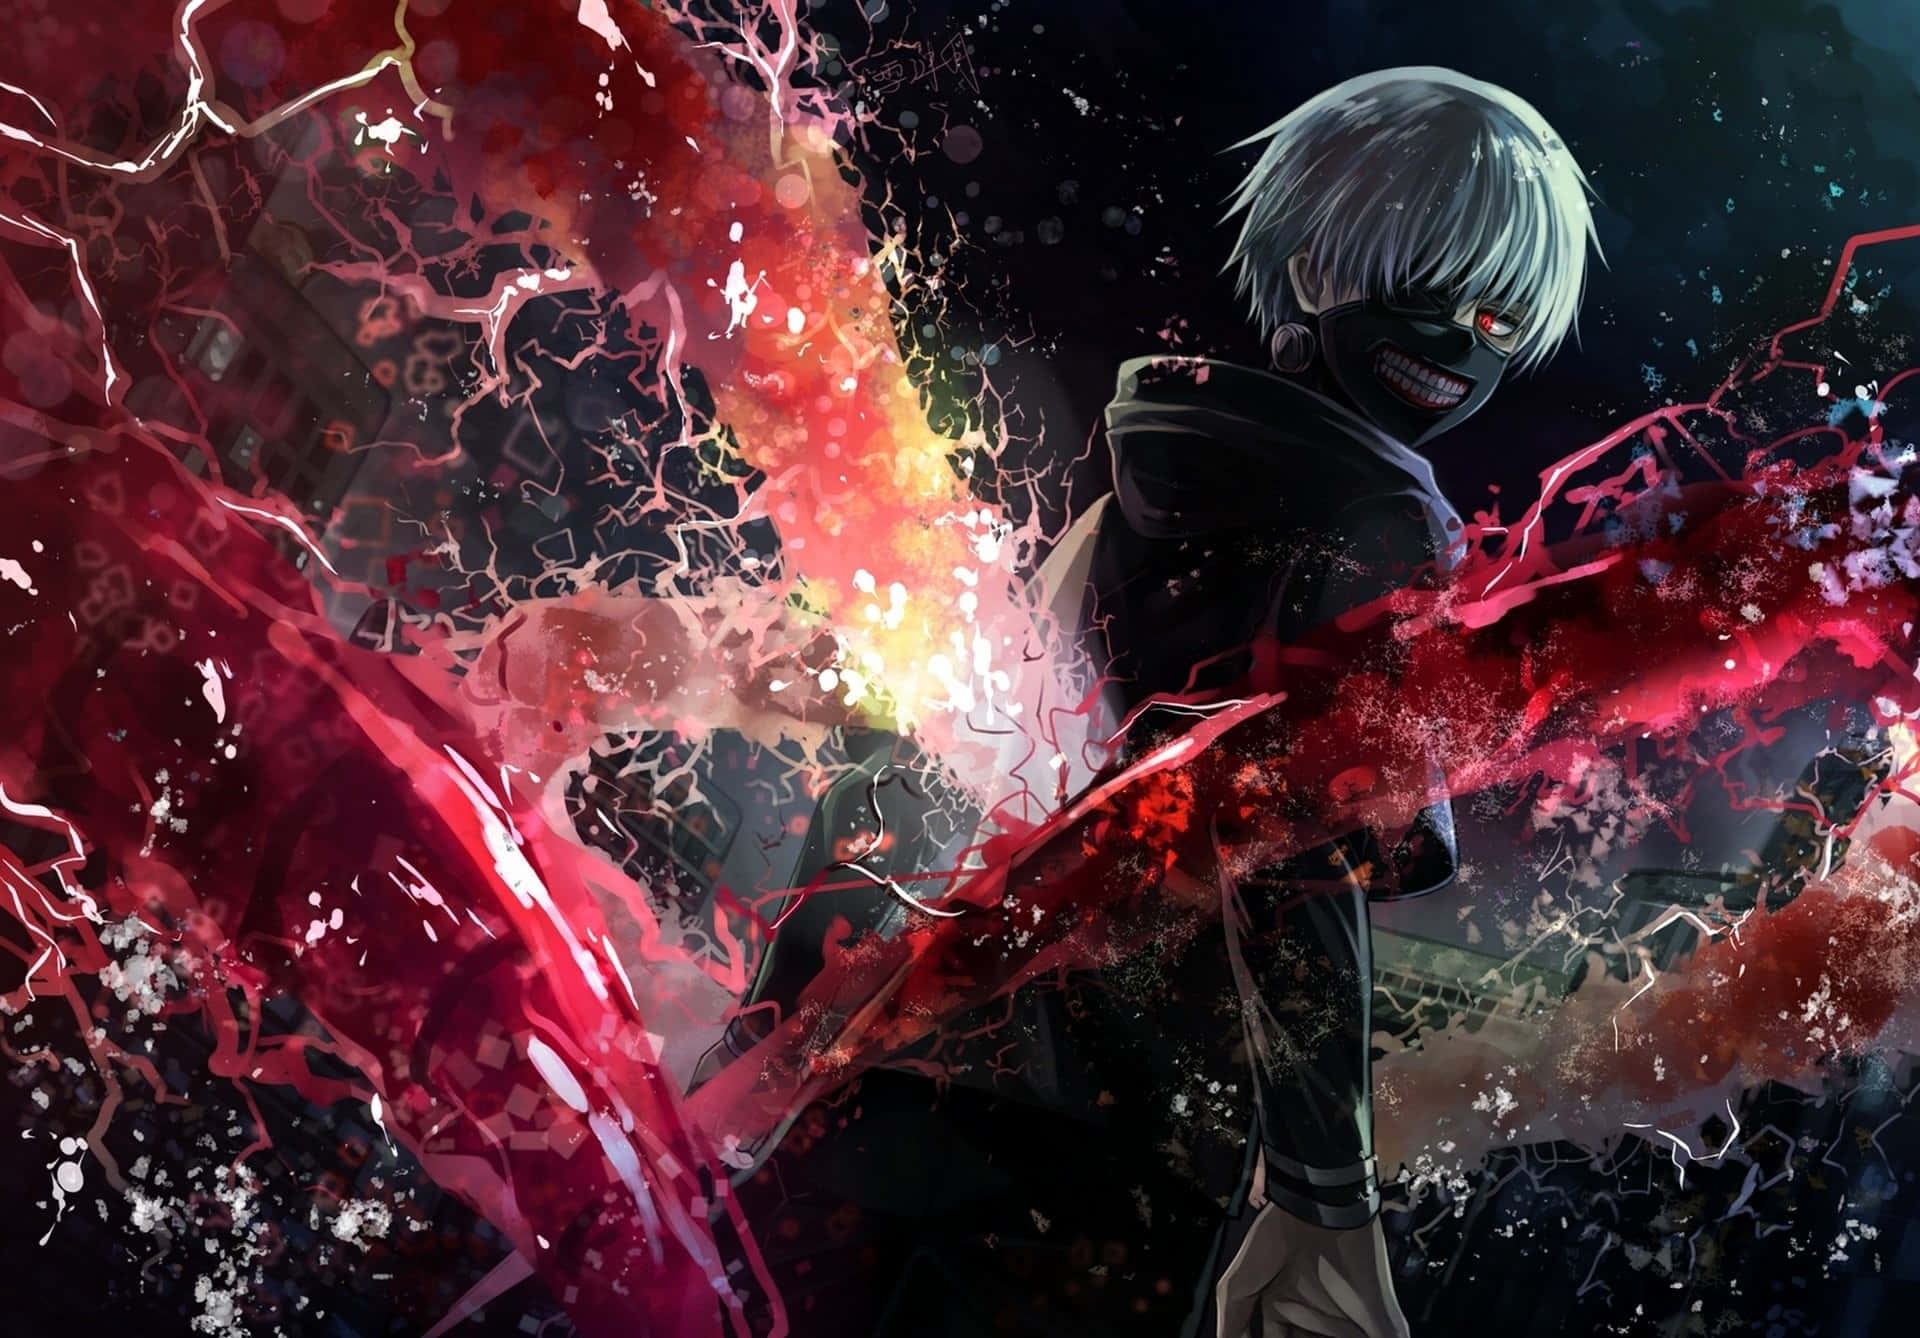 15 Cool Anime Wallpapers For IPhone And Android by jacksmackboi on  DeviantArt